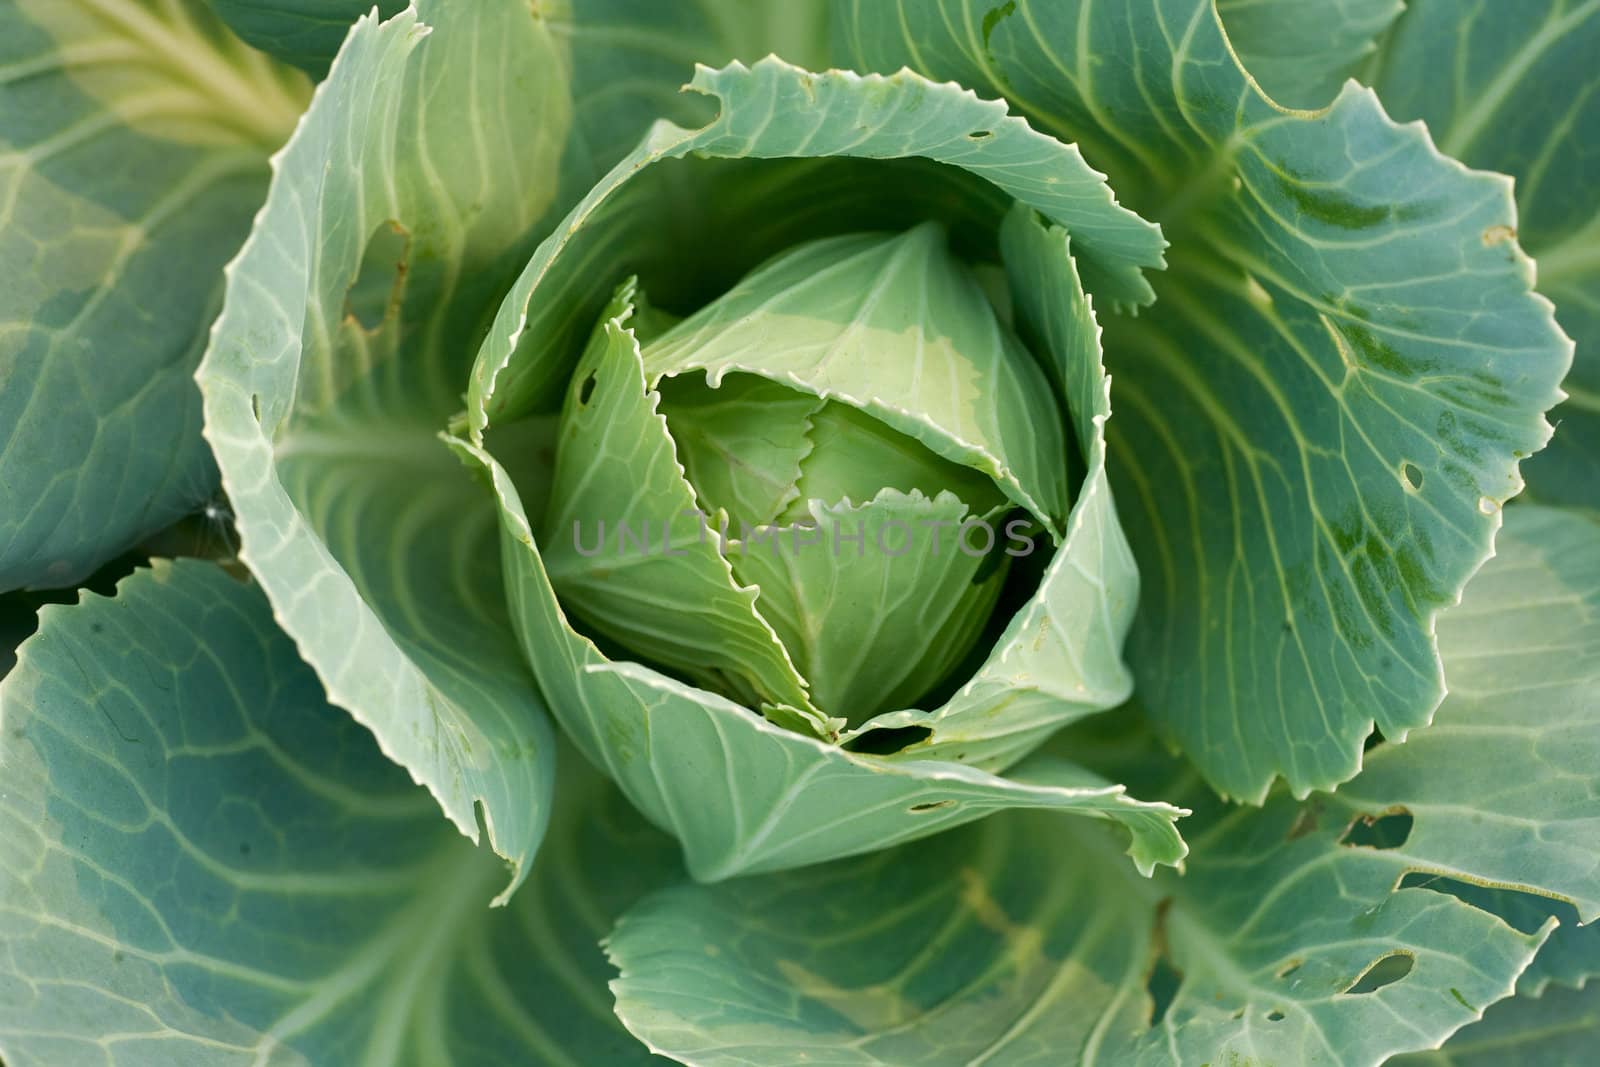 green cabbage's head with leafs. Close-up, full frame.